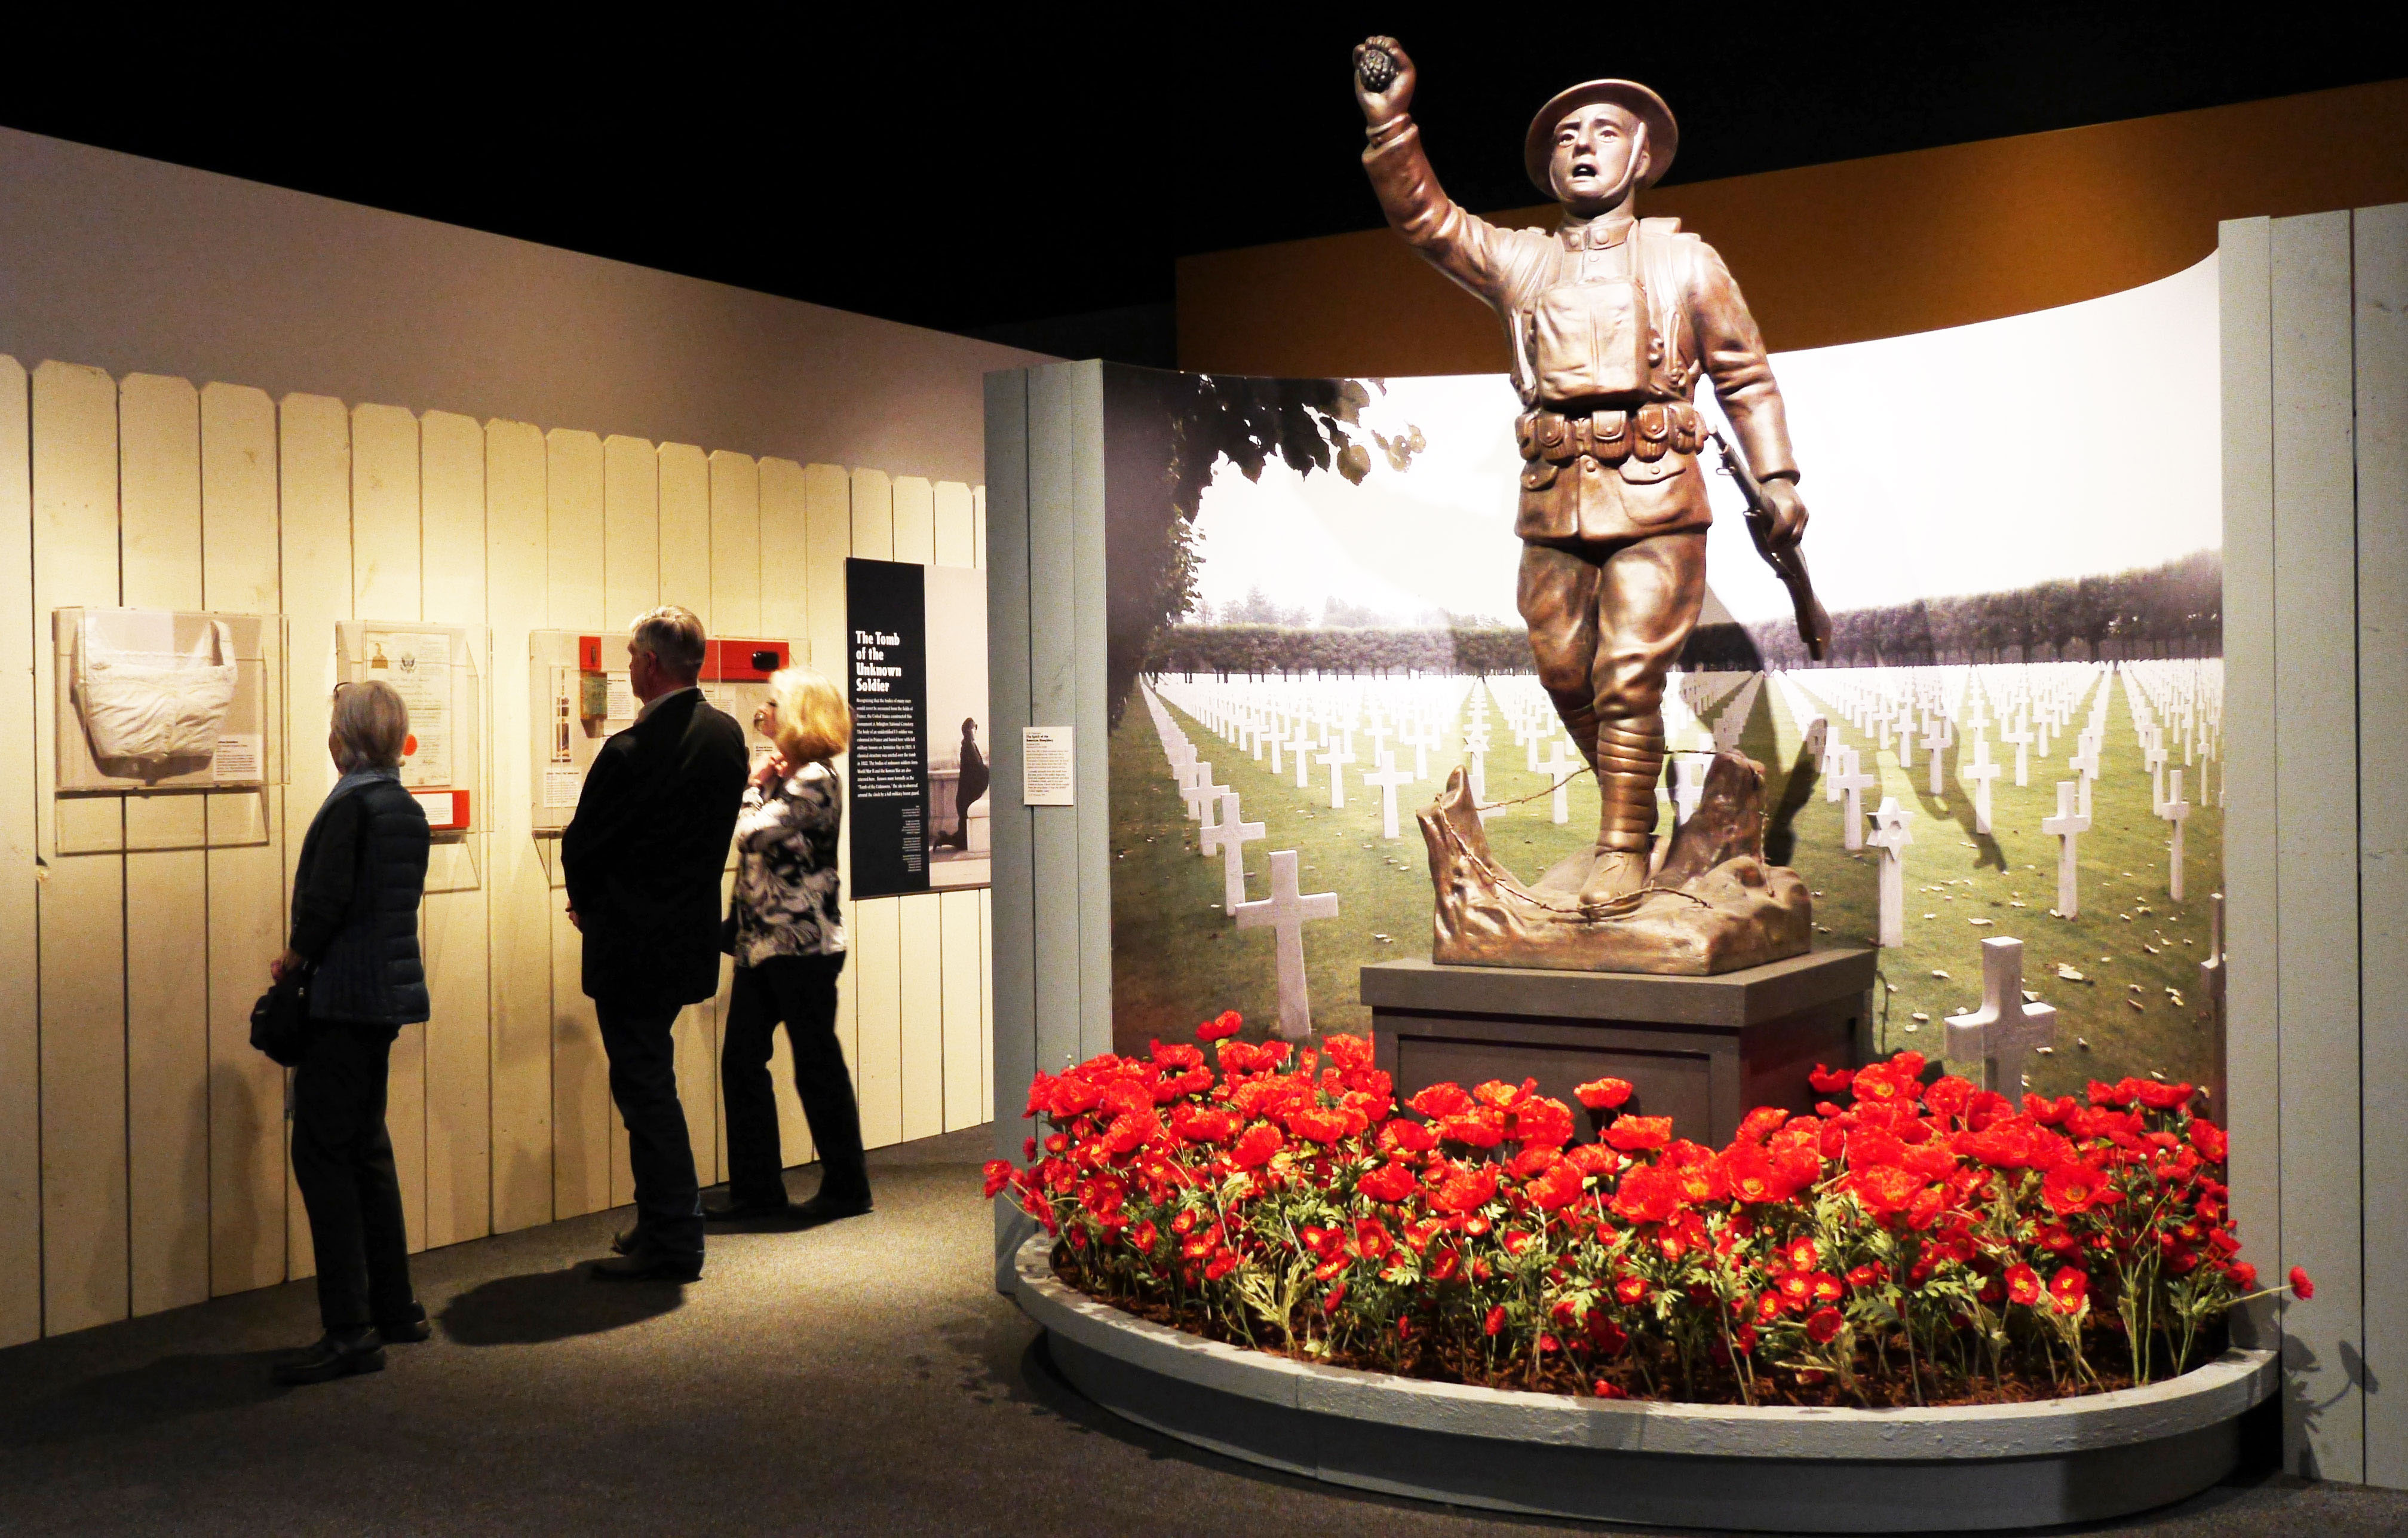 WWI America explores the era of the Great War through recreated scenes from the day, hundreds of rare artifacts, multimedia installations, and eye-witness accounts.